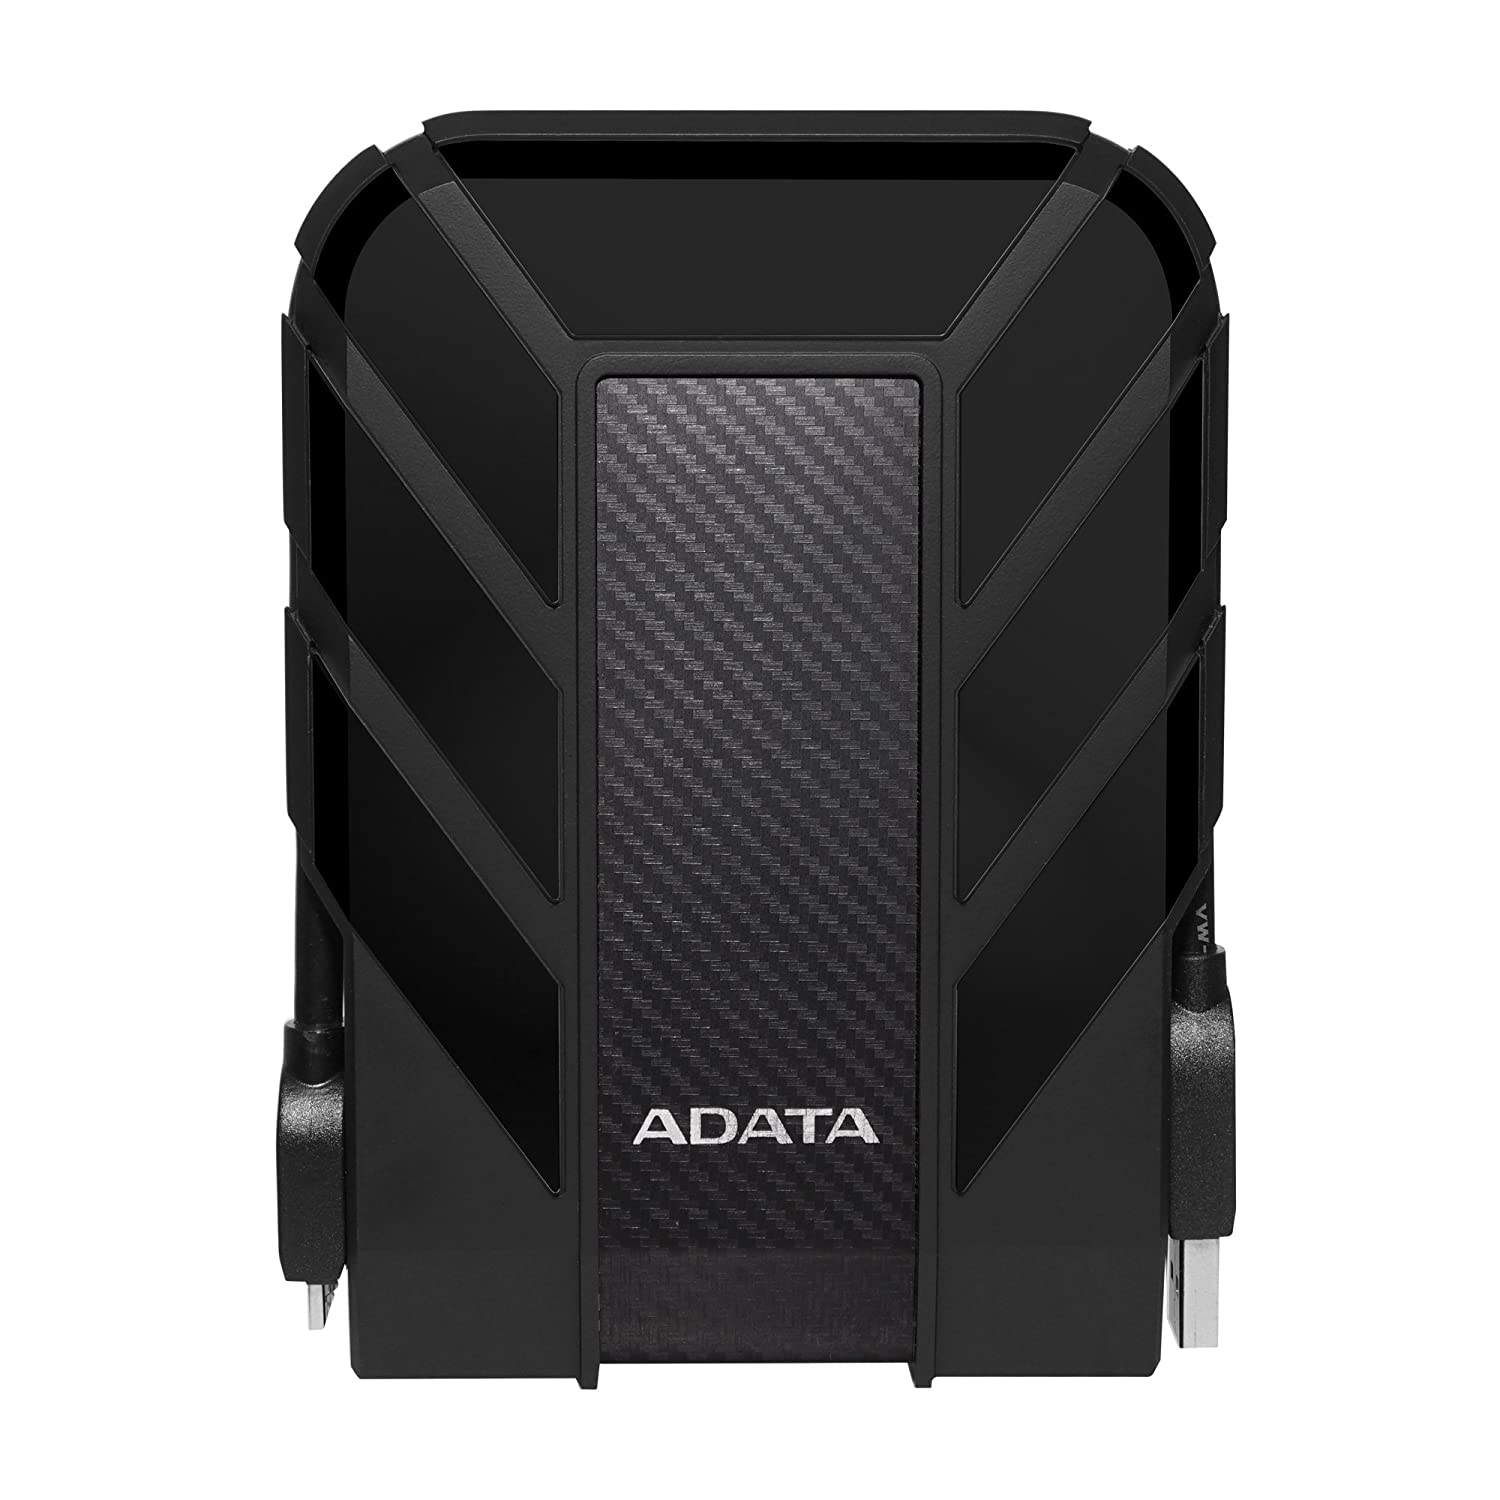 ADATA HD710 Pro 3.5 inch SATA III External Hard Drive/HDD with IP65 Rating – for Windows with Waterproof and Shockproof Technology